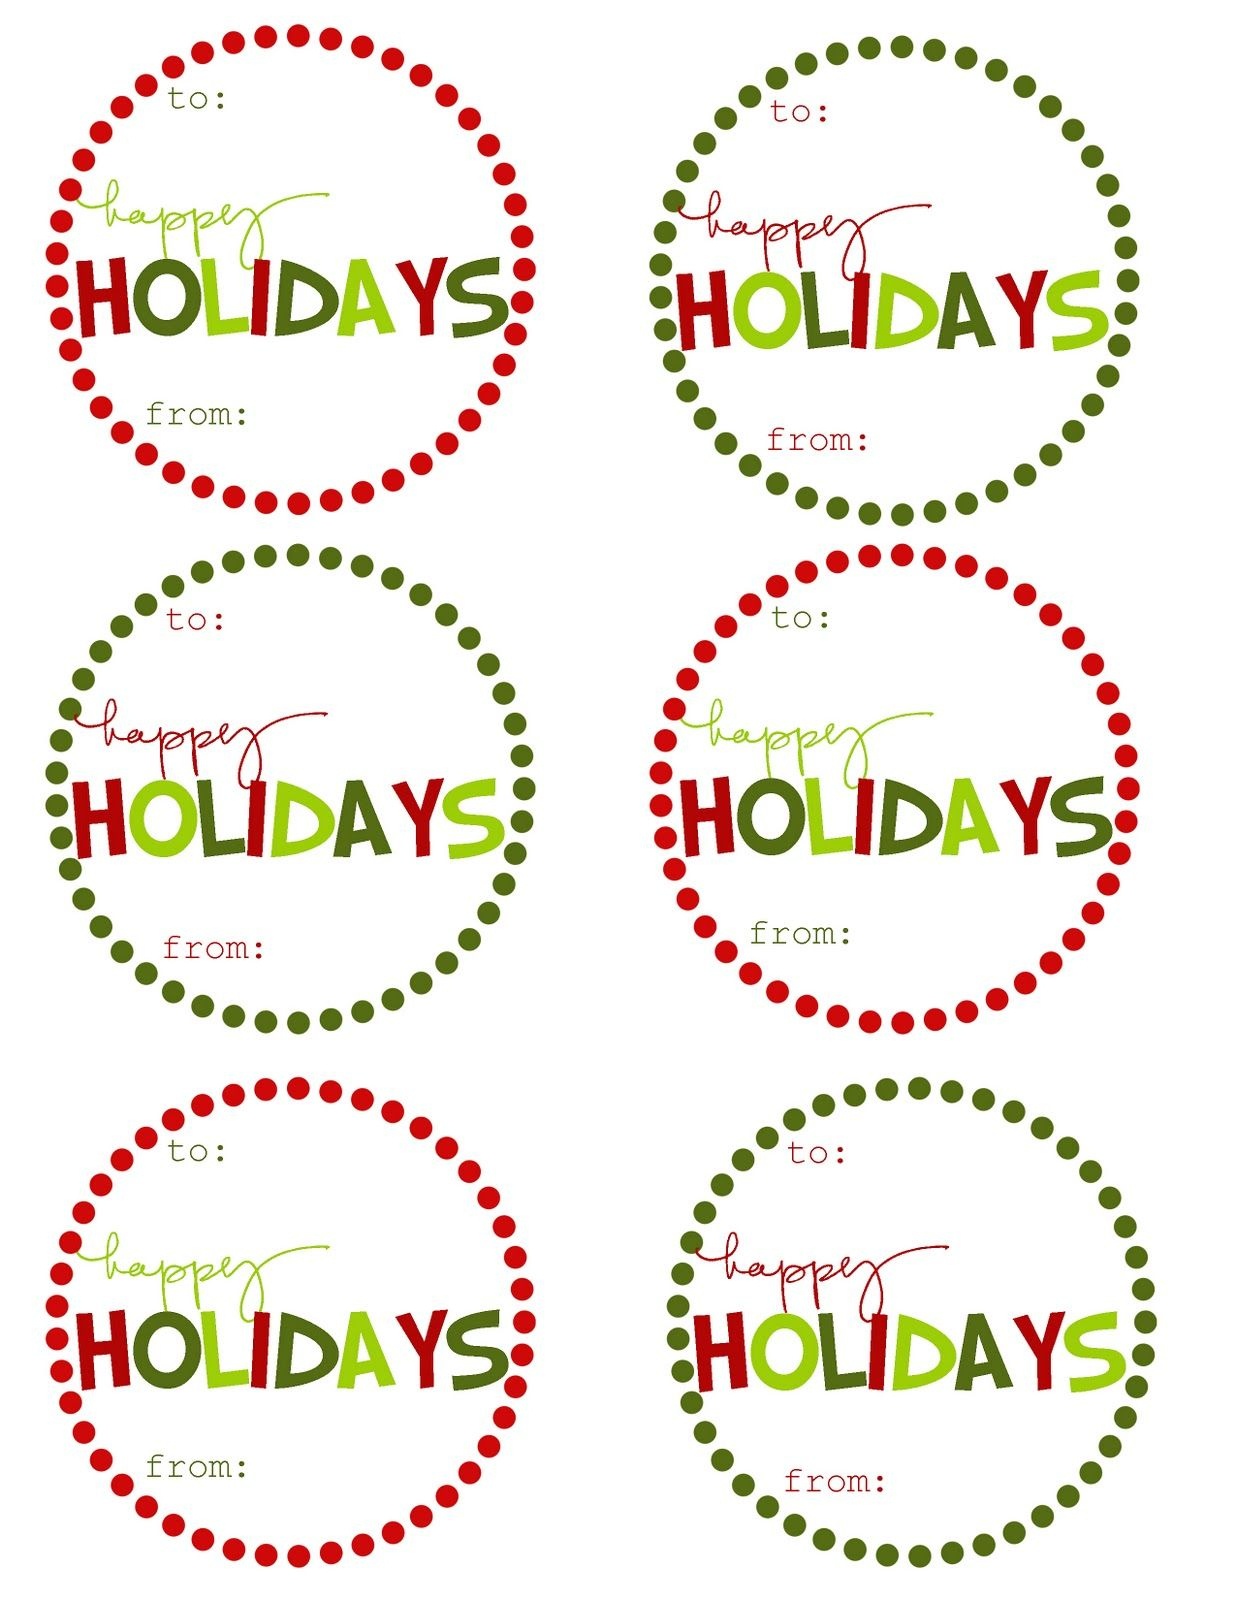 Great Ideas - 22 Free Holiday Printables | Craft Time | Christmas - Free Printable Happy Holidays Gift Tags